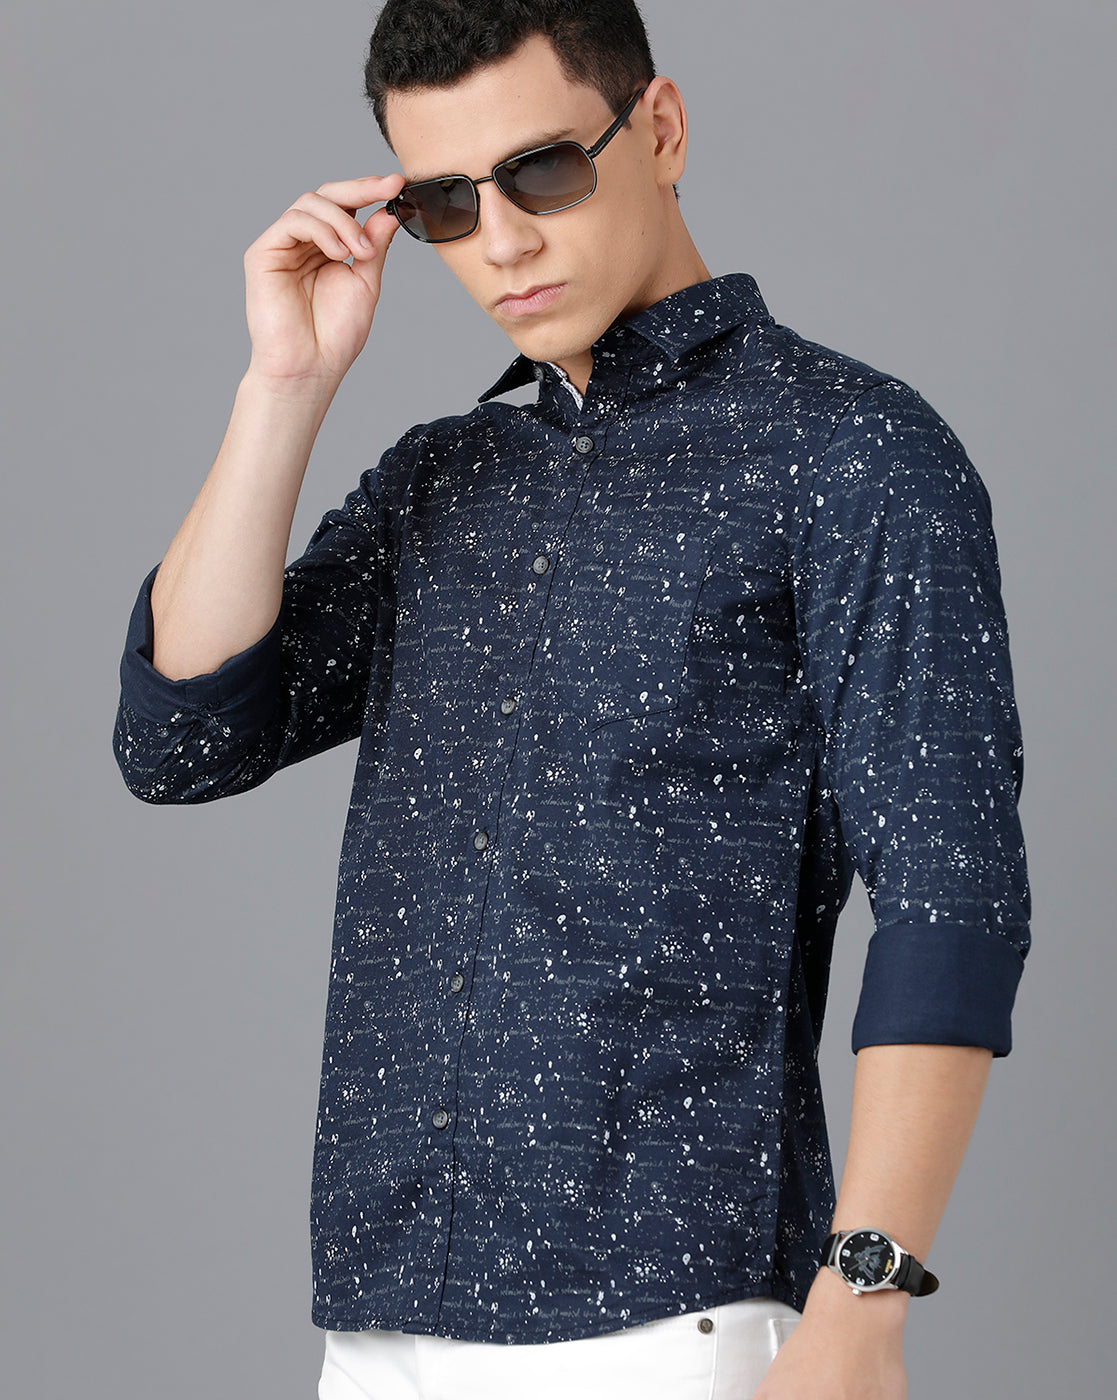 Classic Polo Mens Cotton Full Sleeve Printed Slim Fit Blue Color Spread Collar Woven Shirt | Sn2-52 A